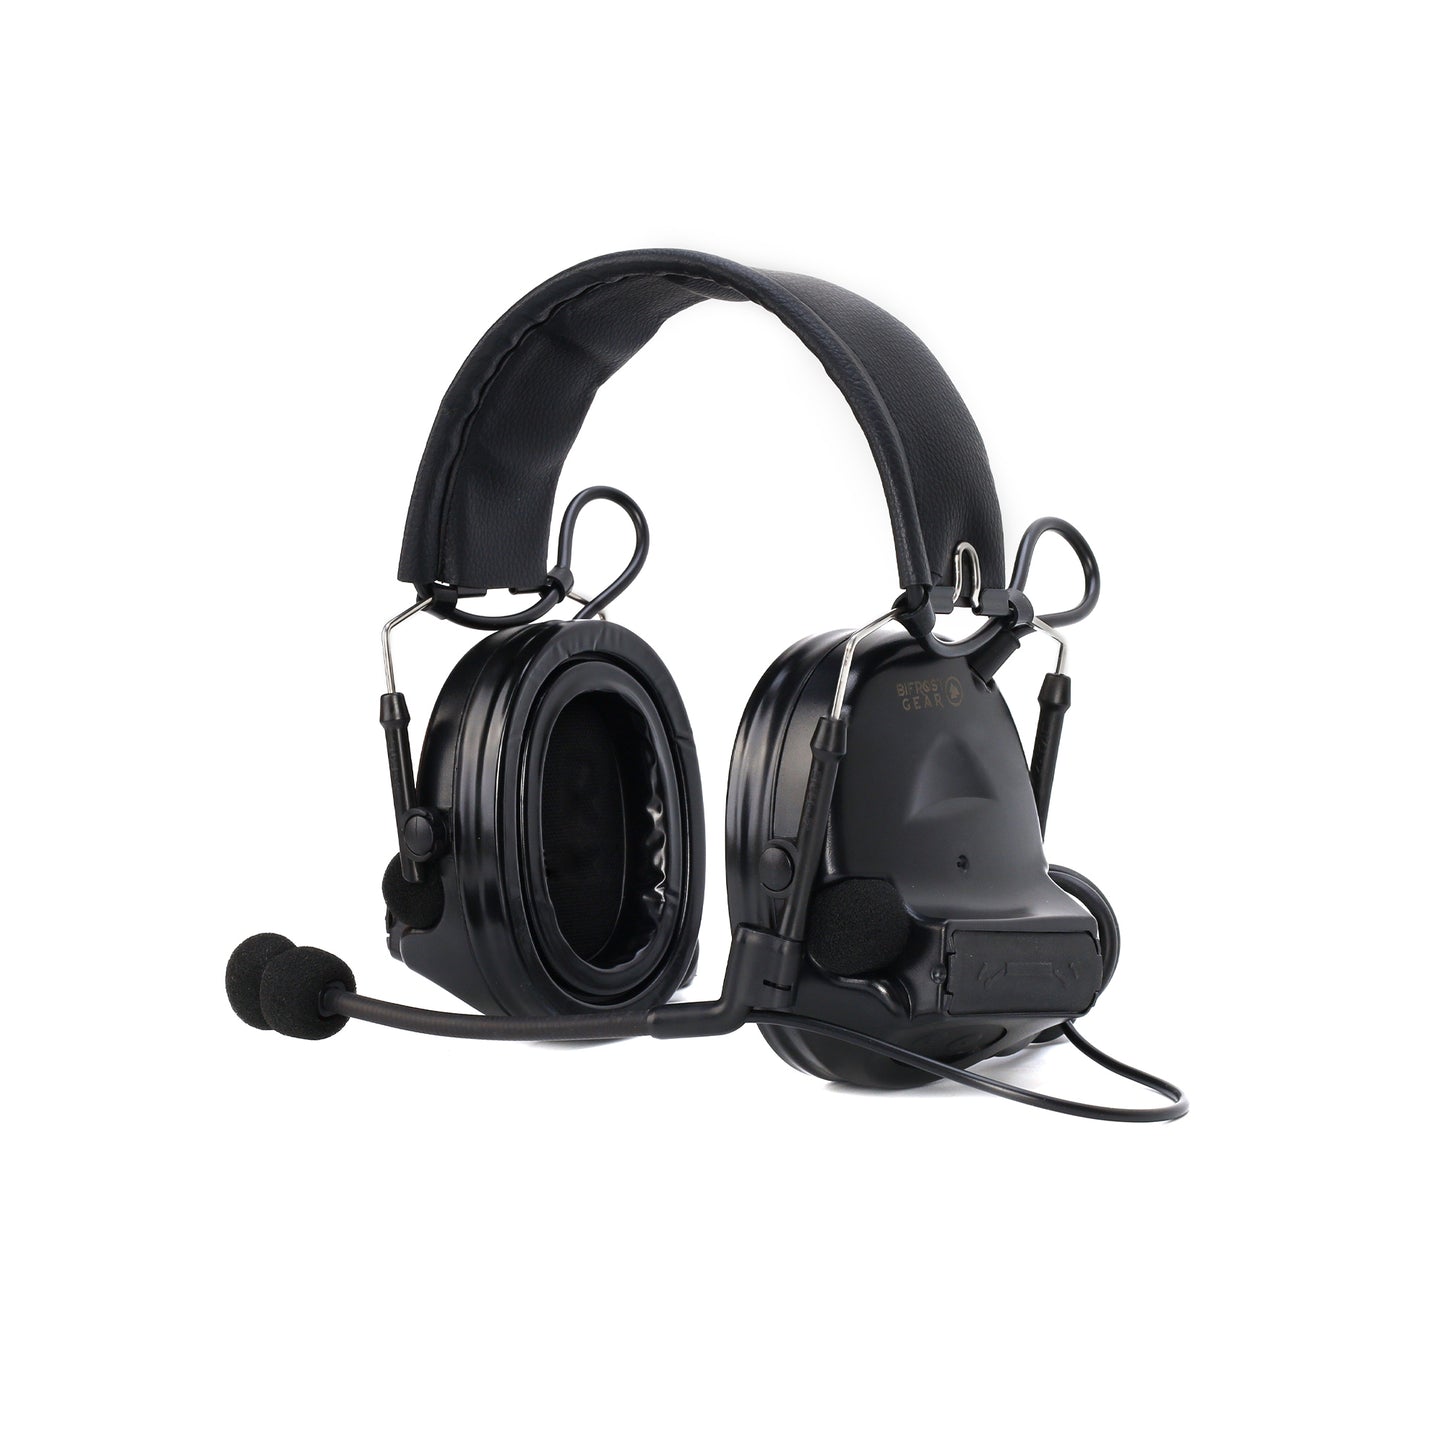 NRR 23db Dual Comm Electronic Hearing Protection Communications Headset